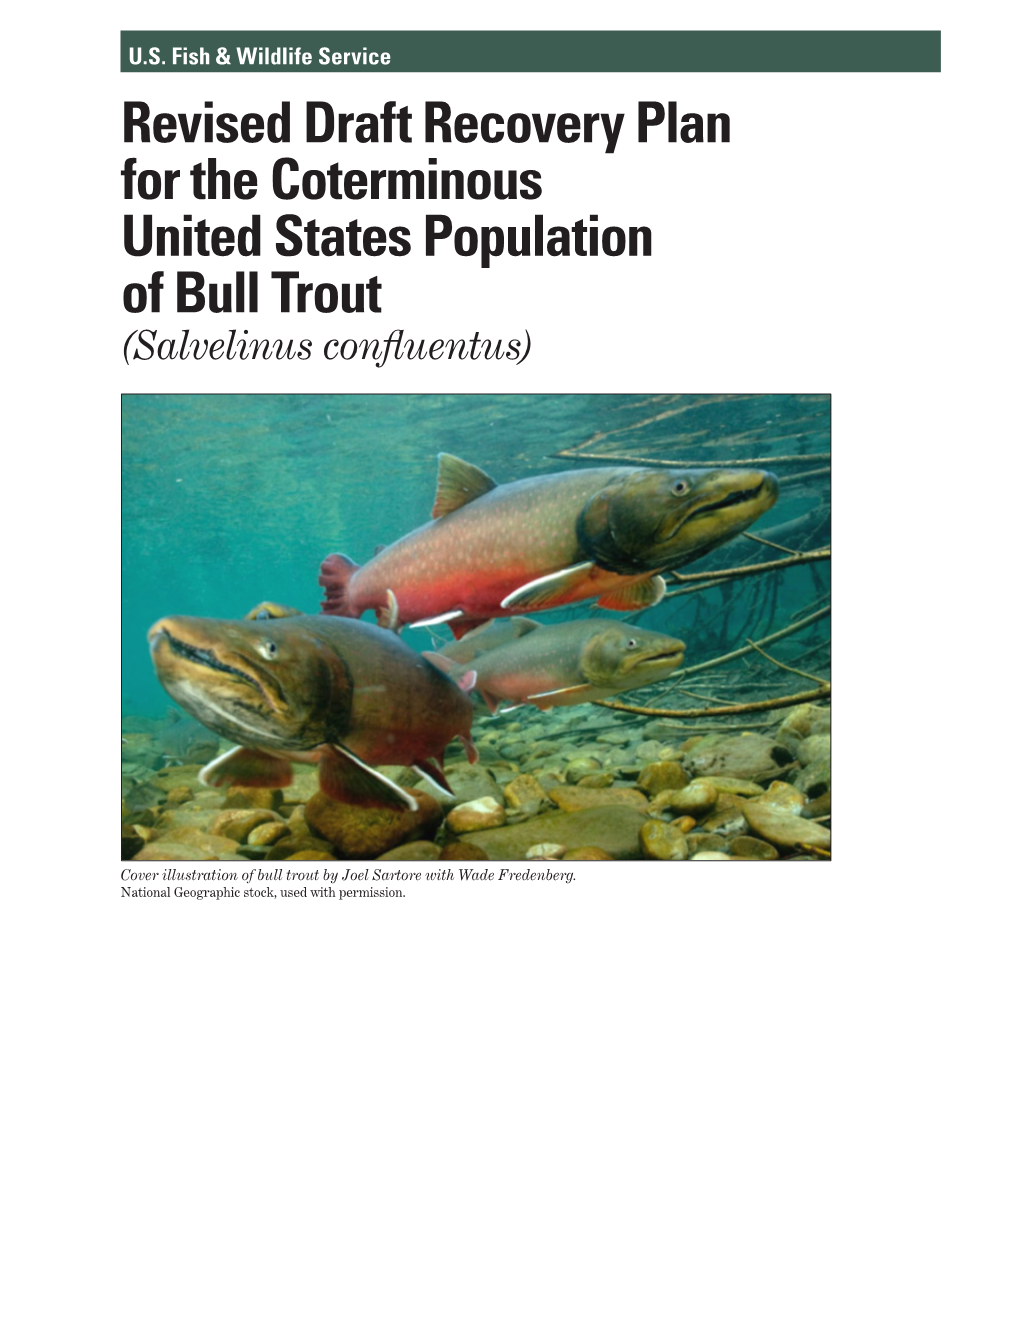 Revised Draft Recovery Plan for the Coterminous United States Population of Bull Trout (Salvelinus Confluentus)